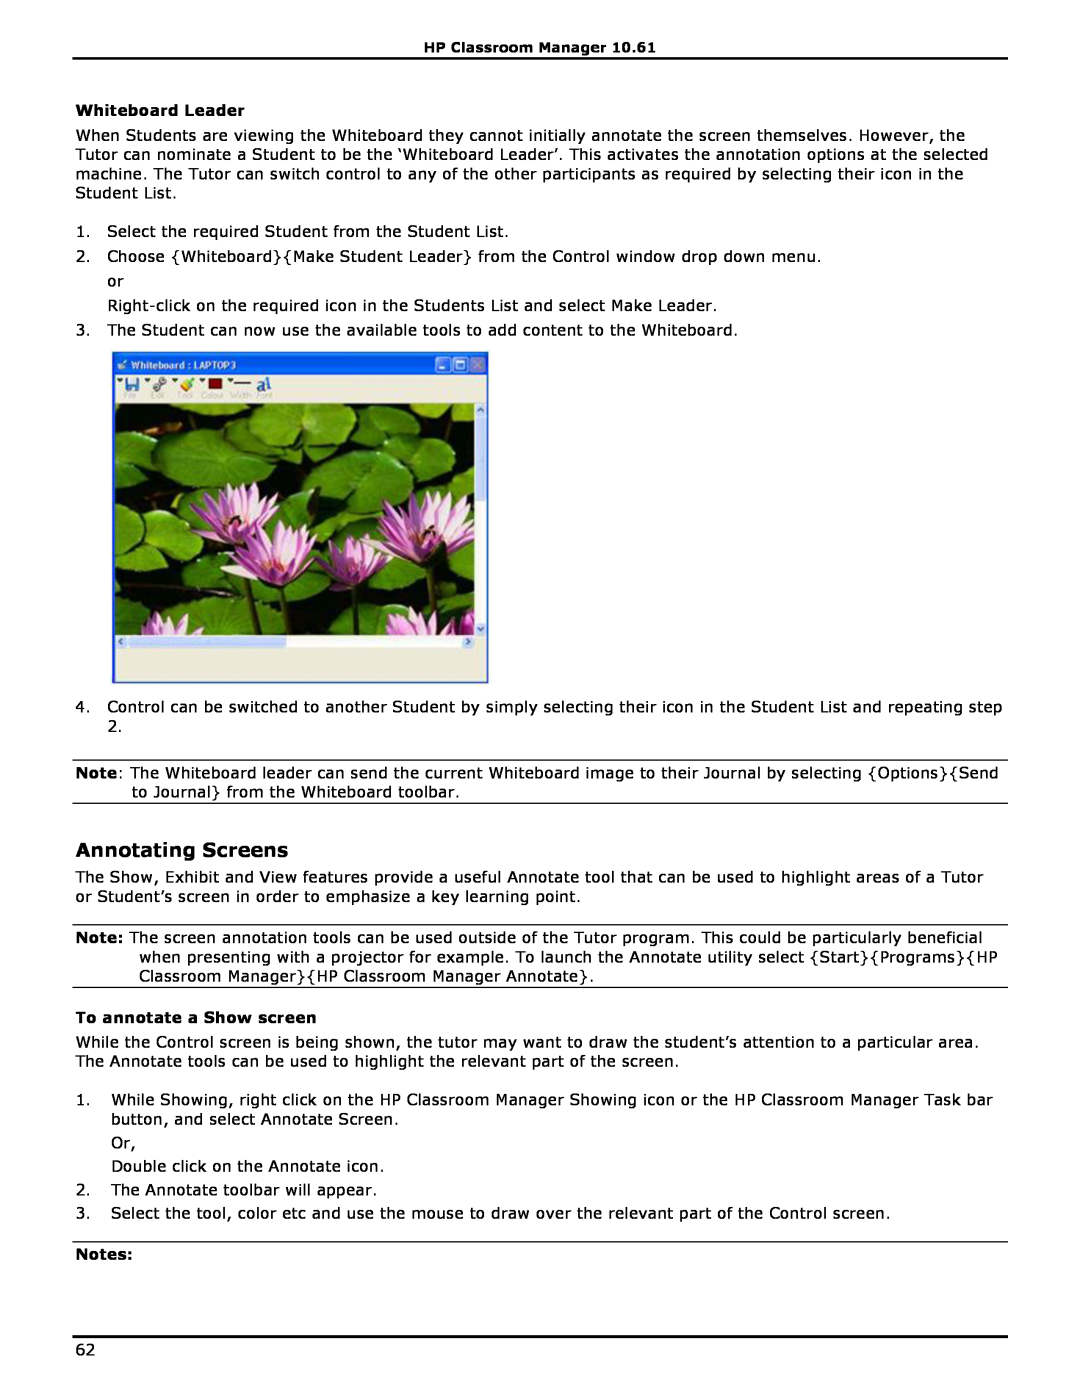 HP Classroom Manager manual Annotating Screens, Whiteboard Leader, To annotate a Show screen 